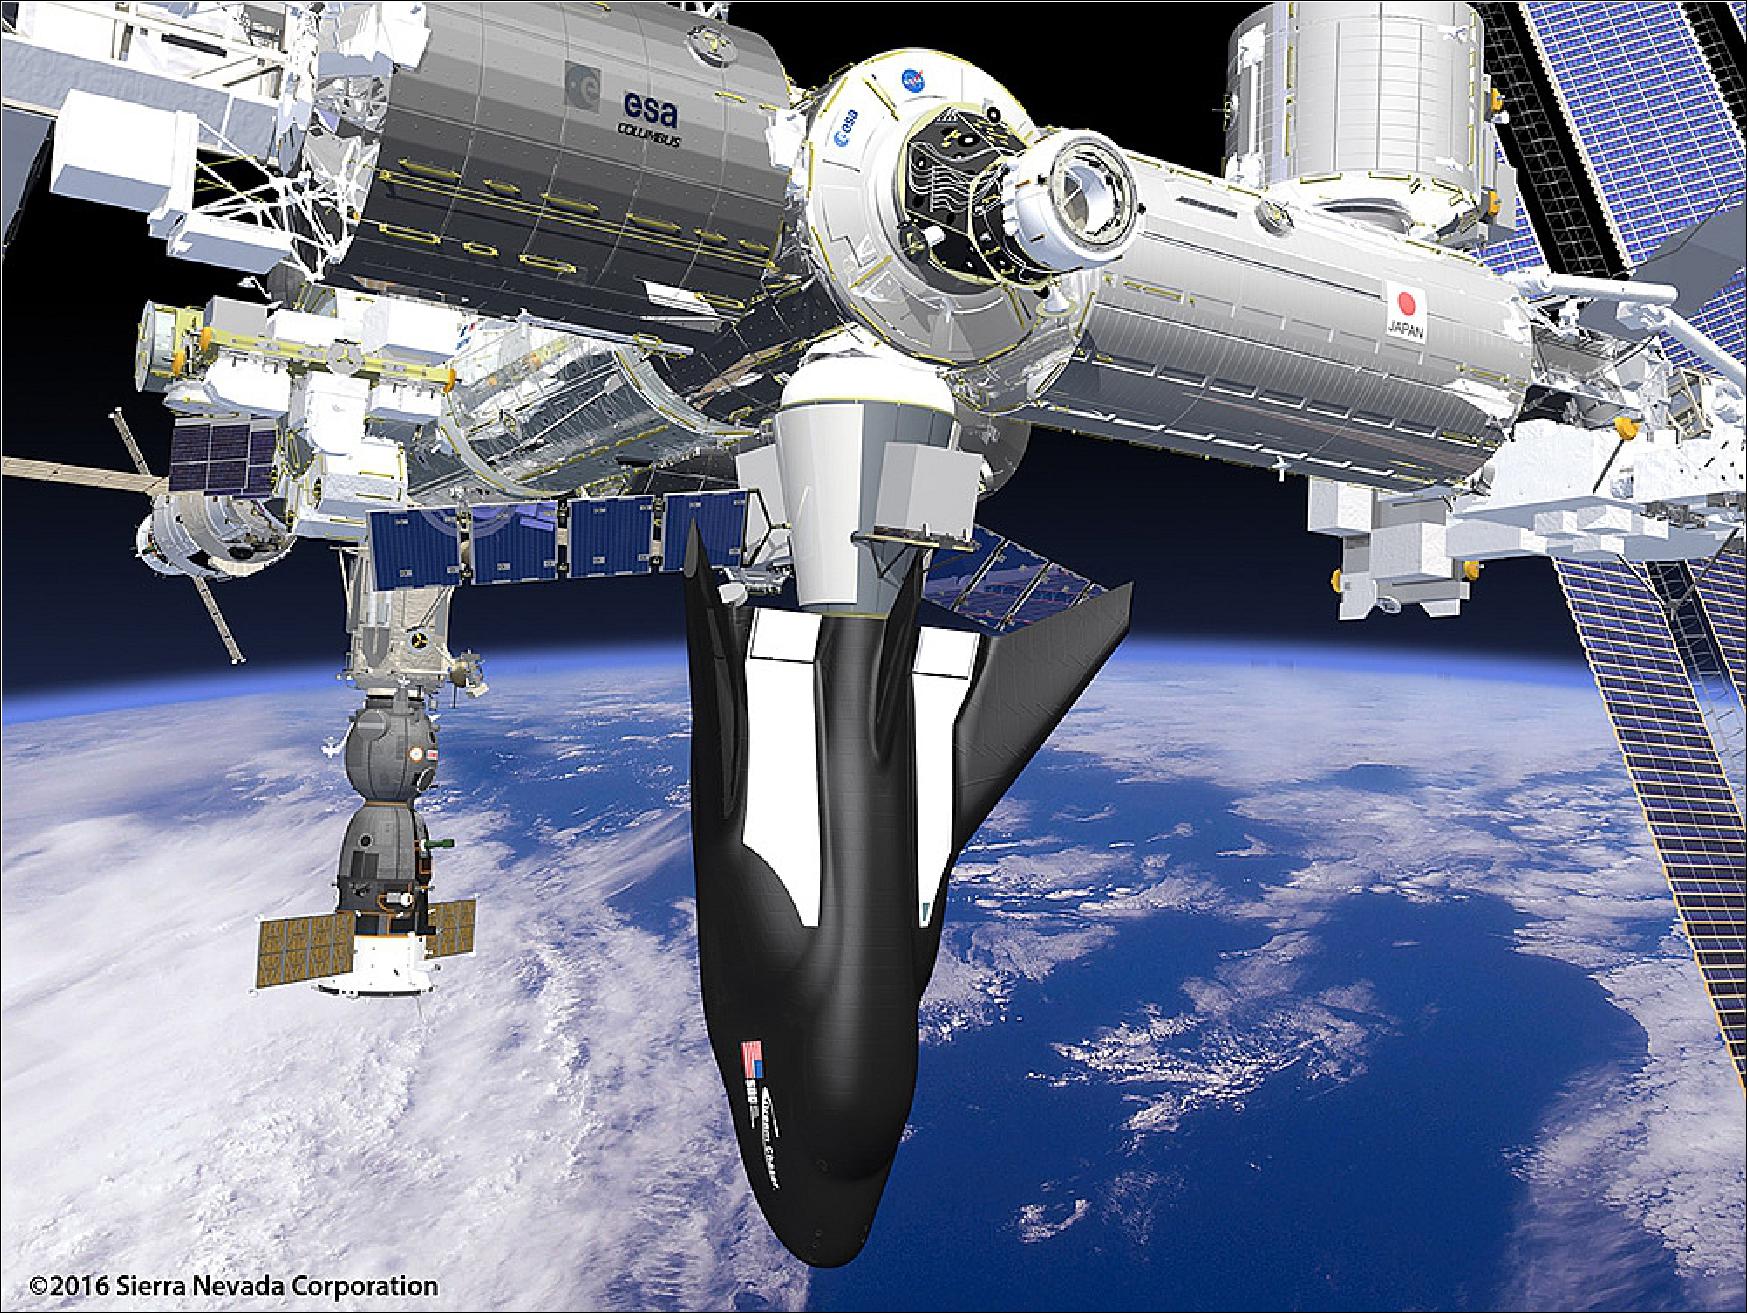 Figure 11: SNC's Dream Chaser Spacecraft and Cargo Module attached to the ISS (image credit: SNC)